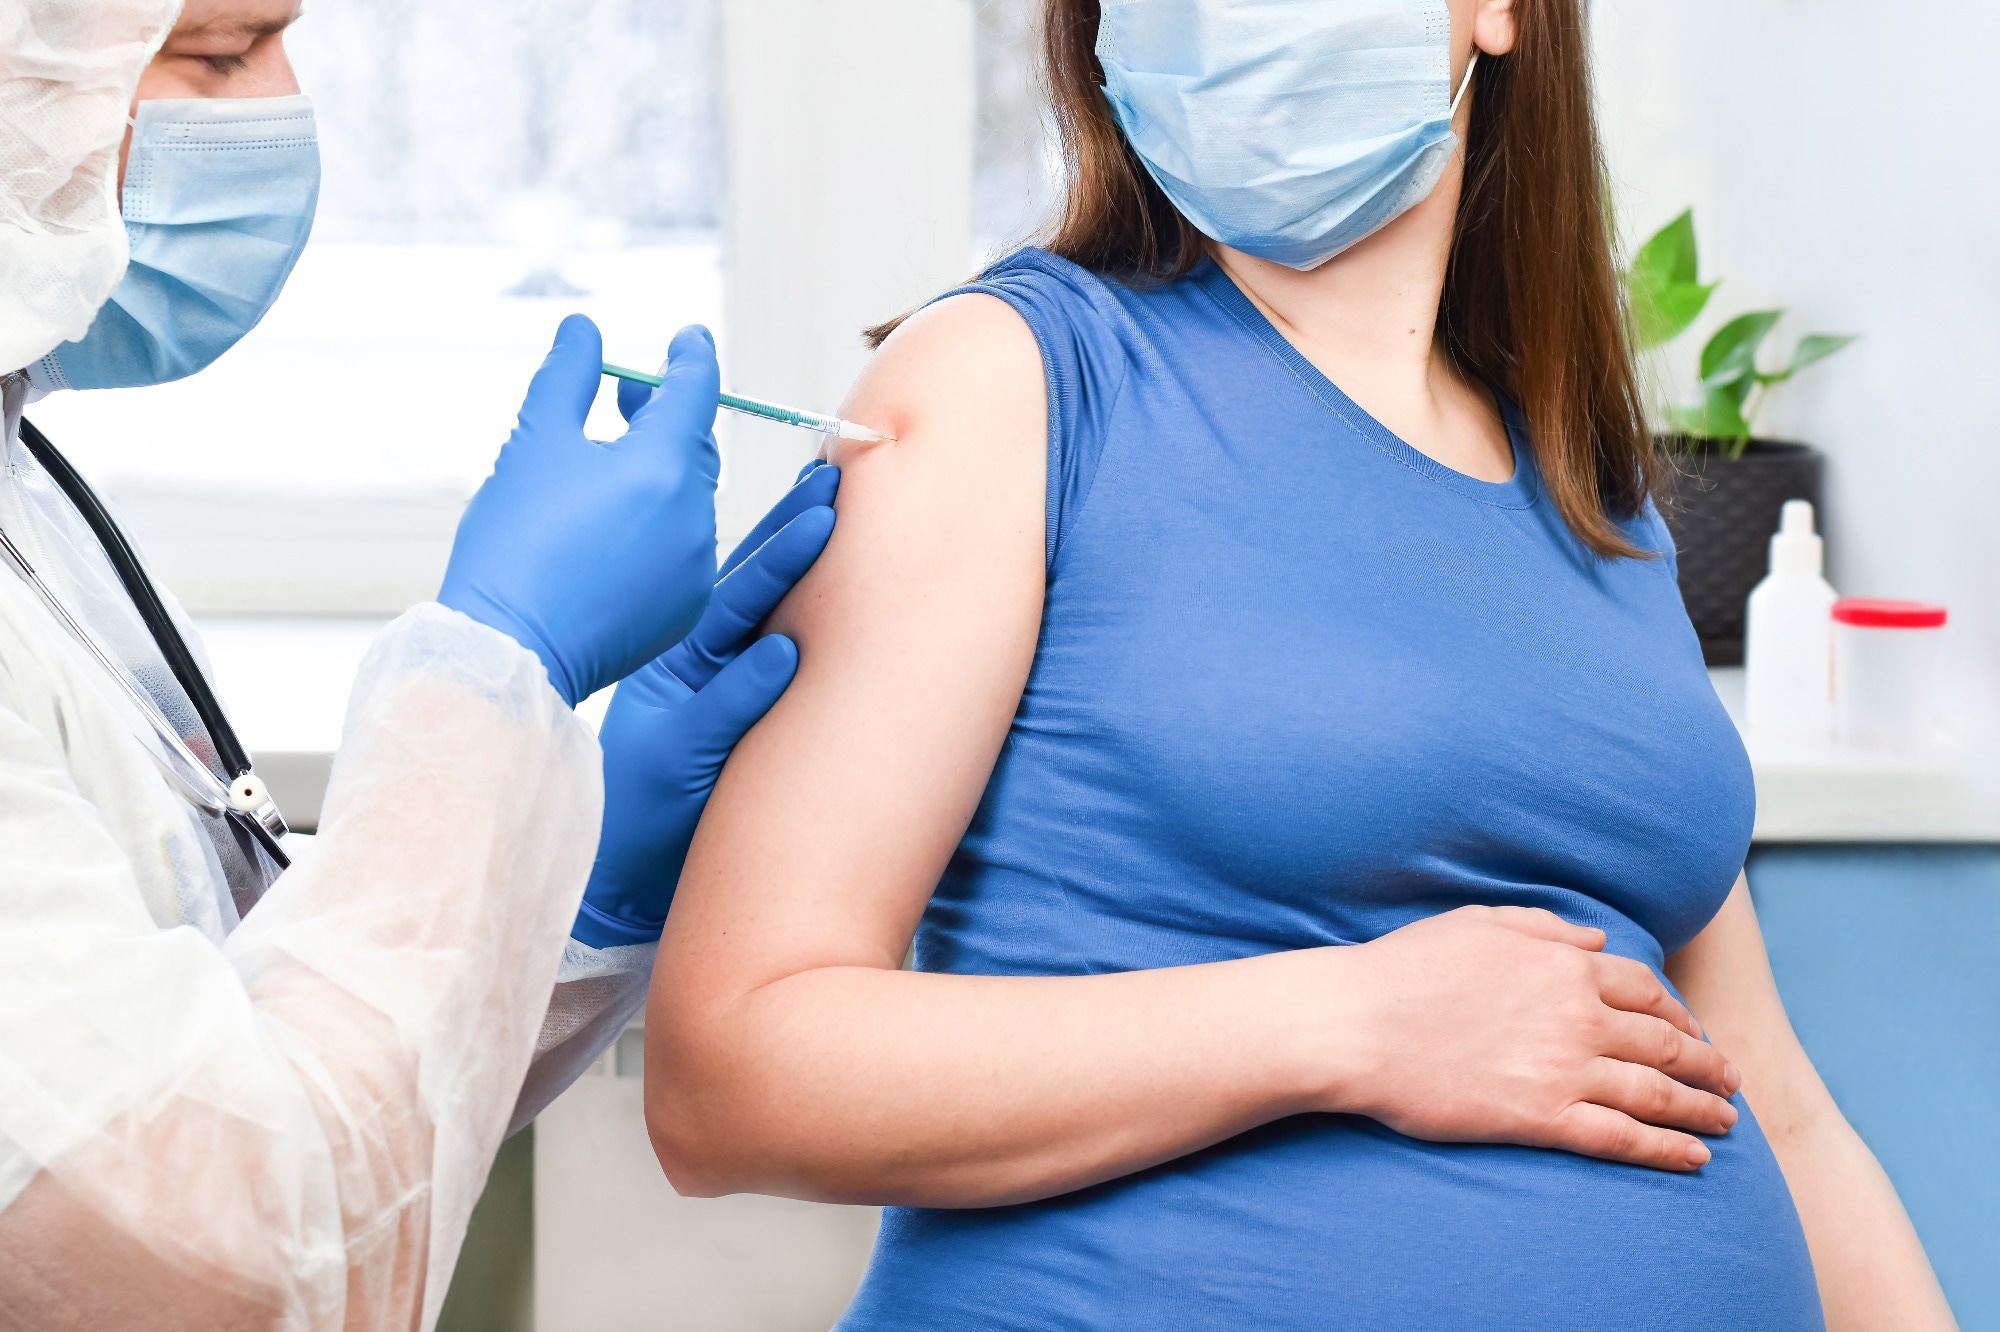 Study: Maternal SARS-CoV-2 Vaccination and Infant Protection Against SARS-CoV-2 During the First 6 Months of Life. ​​​​​​​Image Credit: Marina Demidiuk / Shutterstock